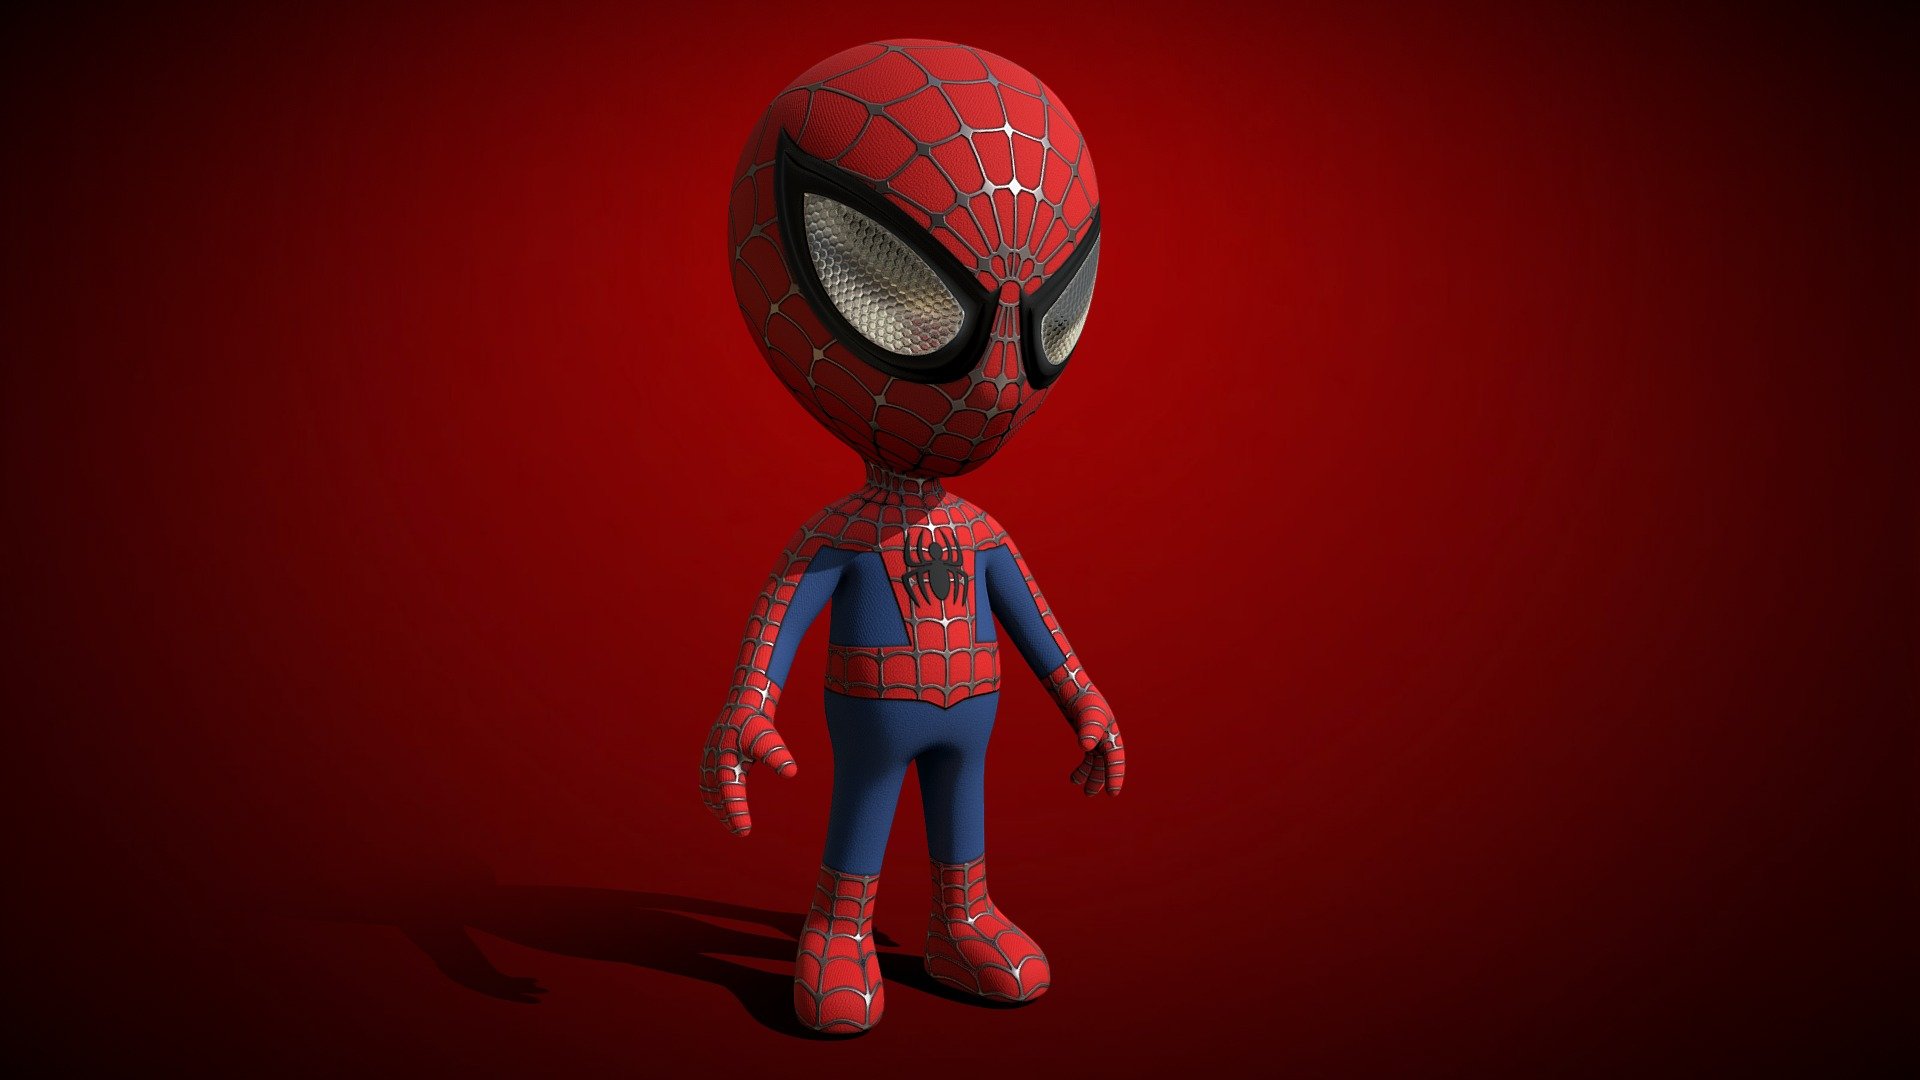 3dmodel of Spiderman in A-pose (toys figures styles).
Modeling 3dsmax texturing 3dcoattextura 3d model